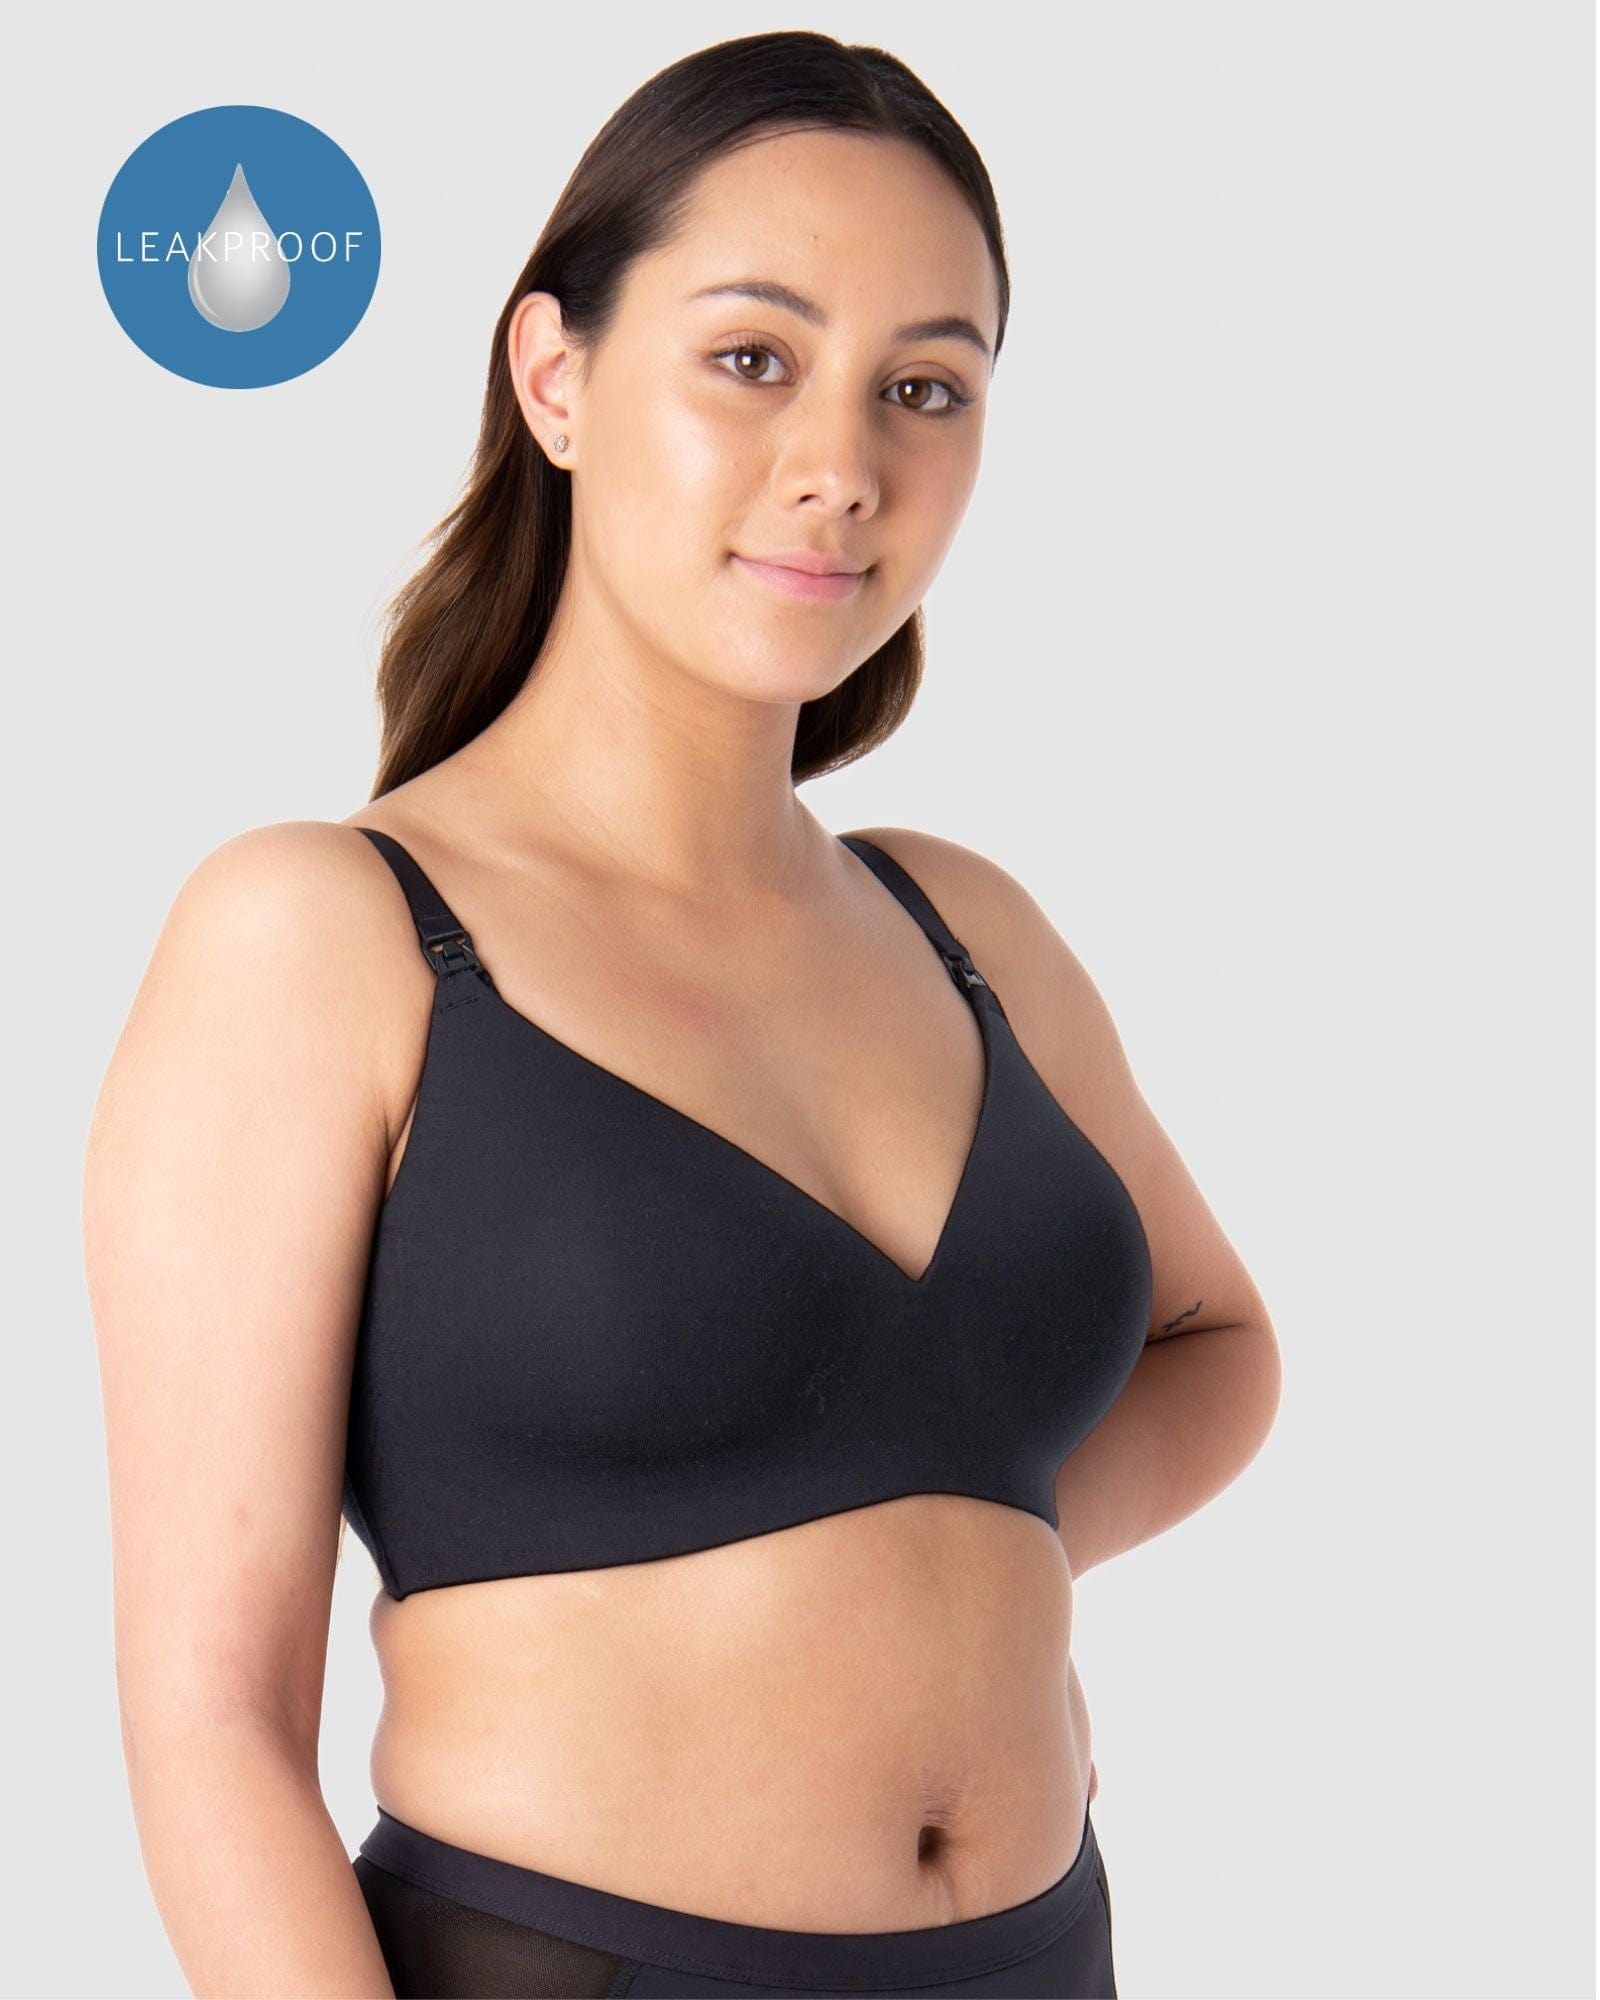 Everything You Need To Know About Leakproof Bras, Reusable Breast Pads -  Hotmilk Lingerie